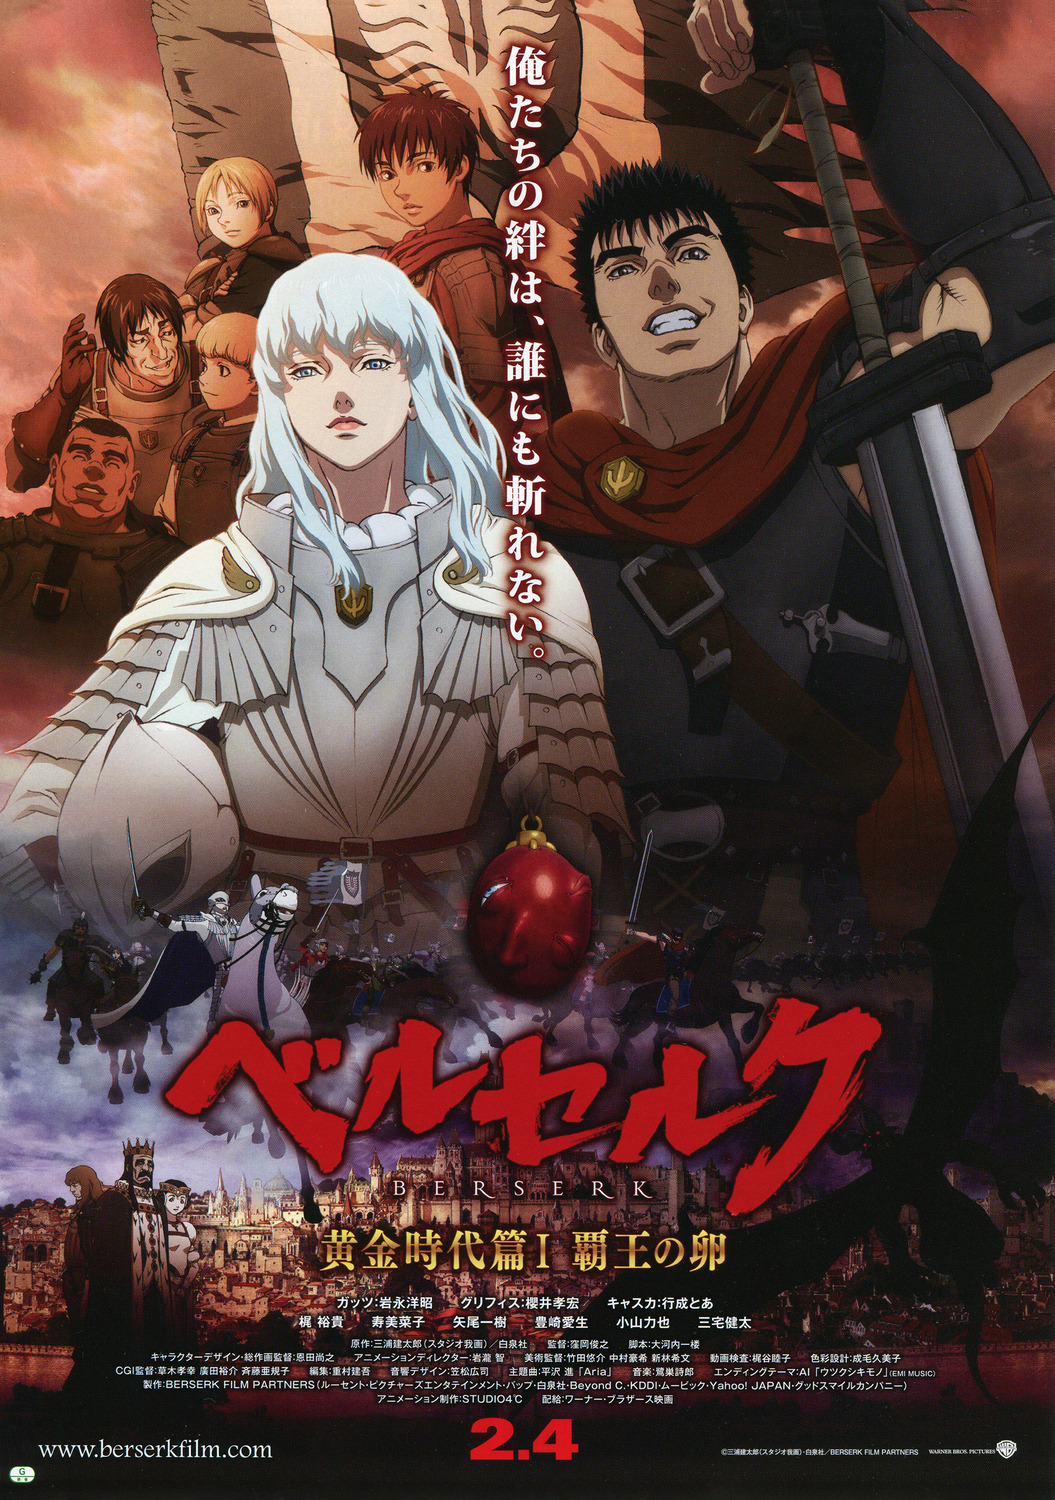 Extra Large Movie Poster Image for Berserk: Golden Age I - Egg of the Supreme King 